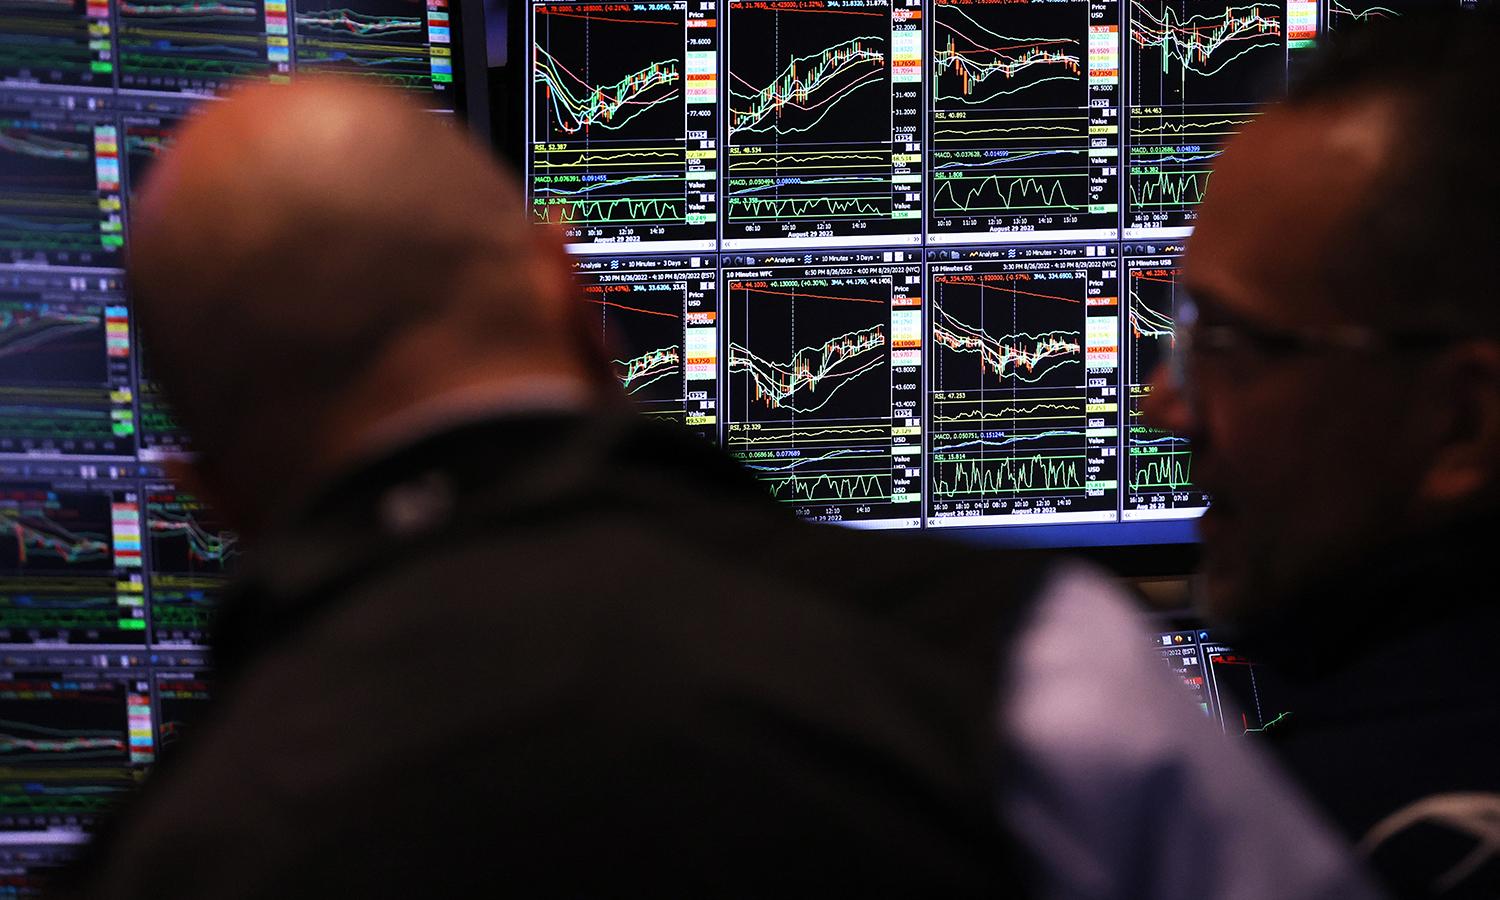 Screens show stocks being traded at the New York Stock Exchange